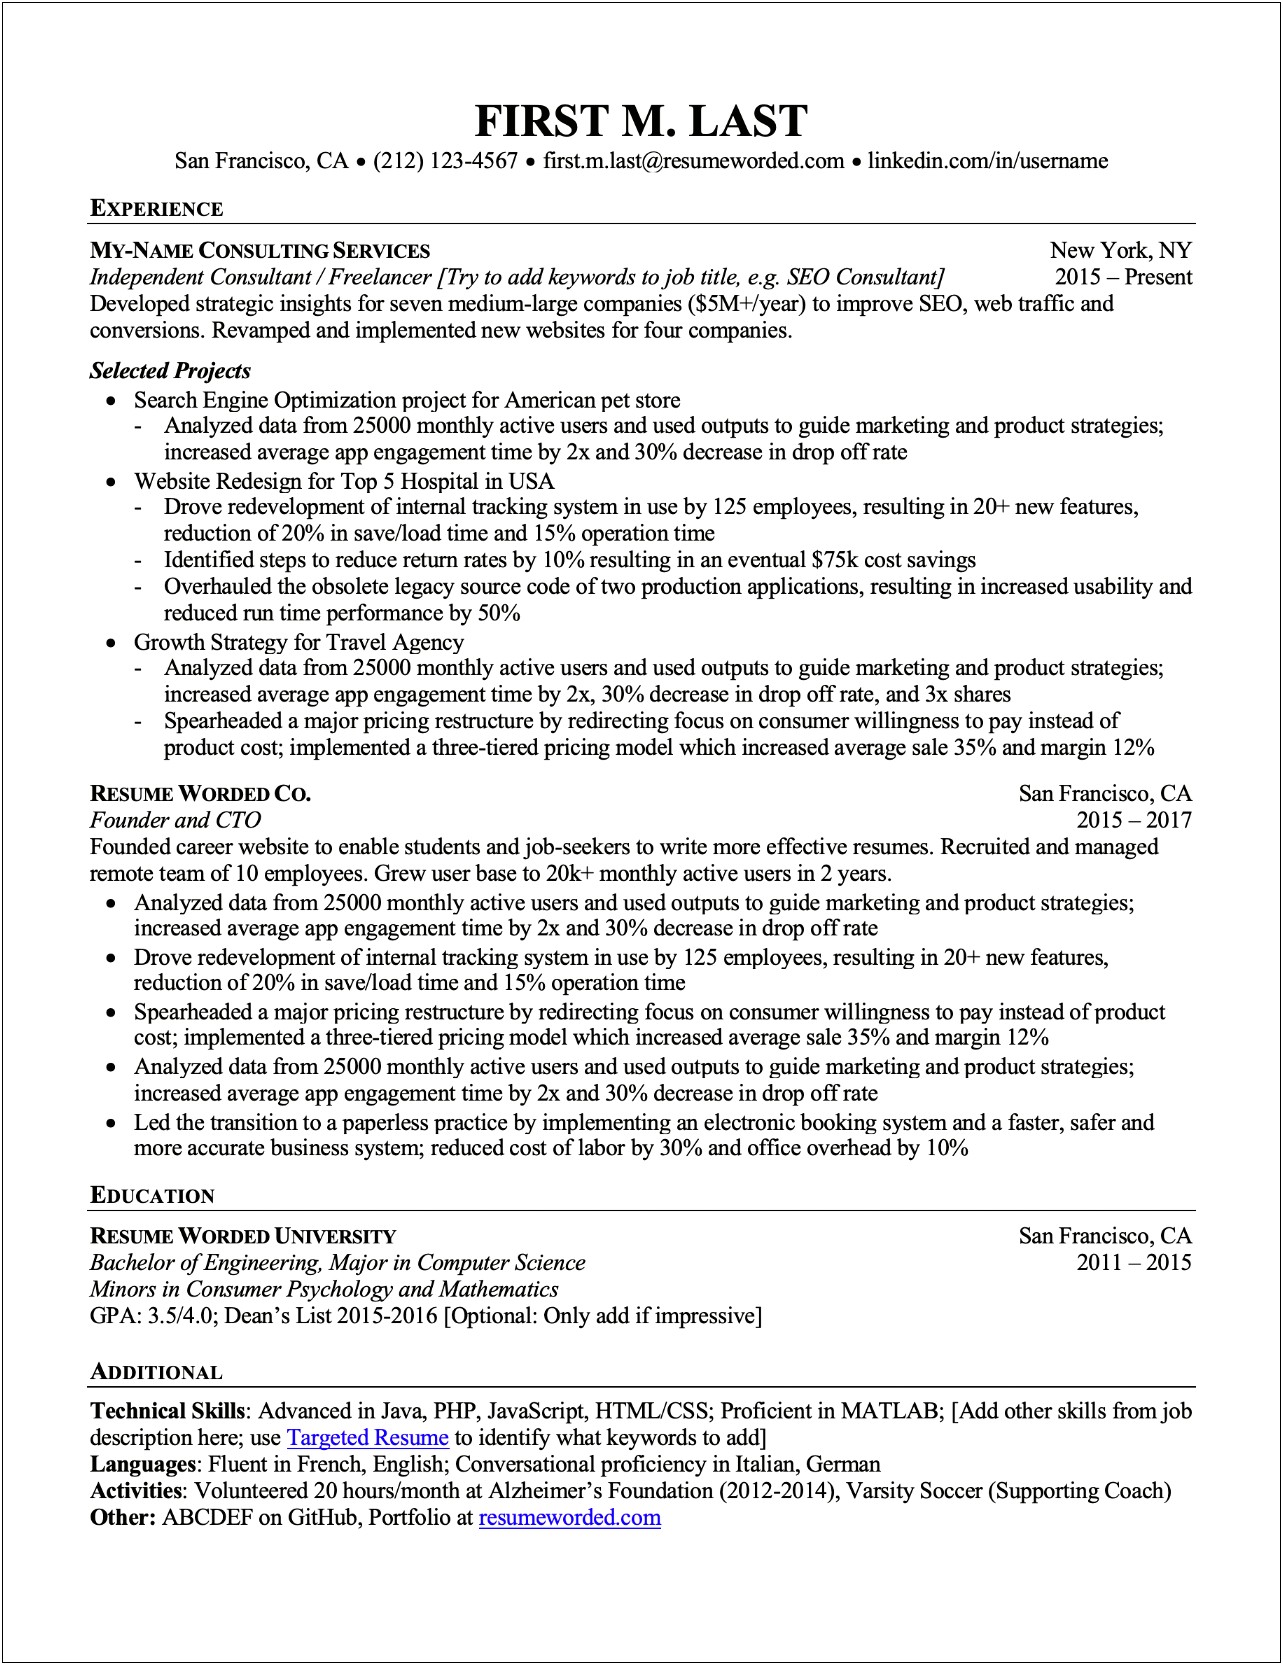 Resume Template For It Students Ats